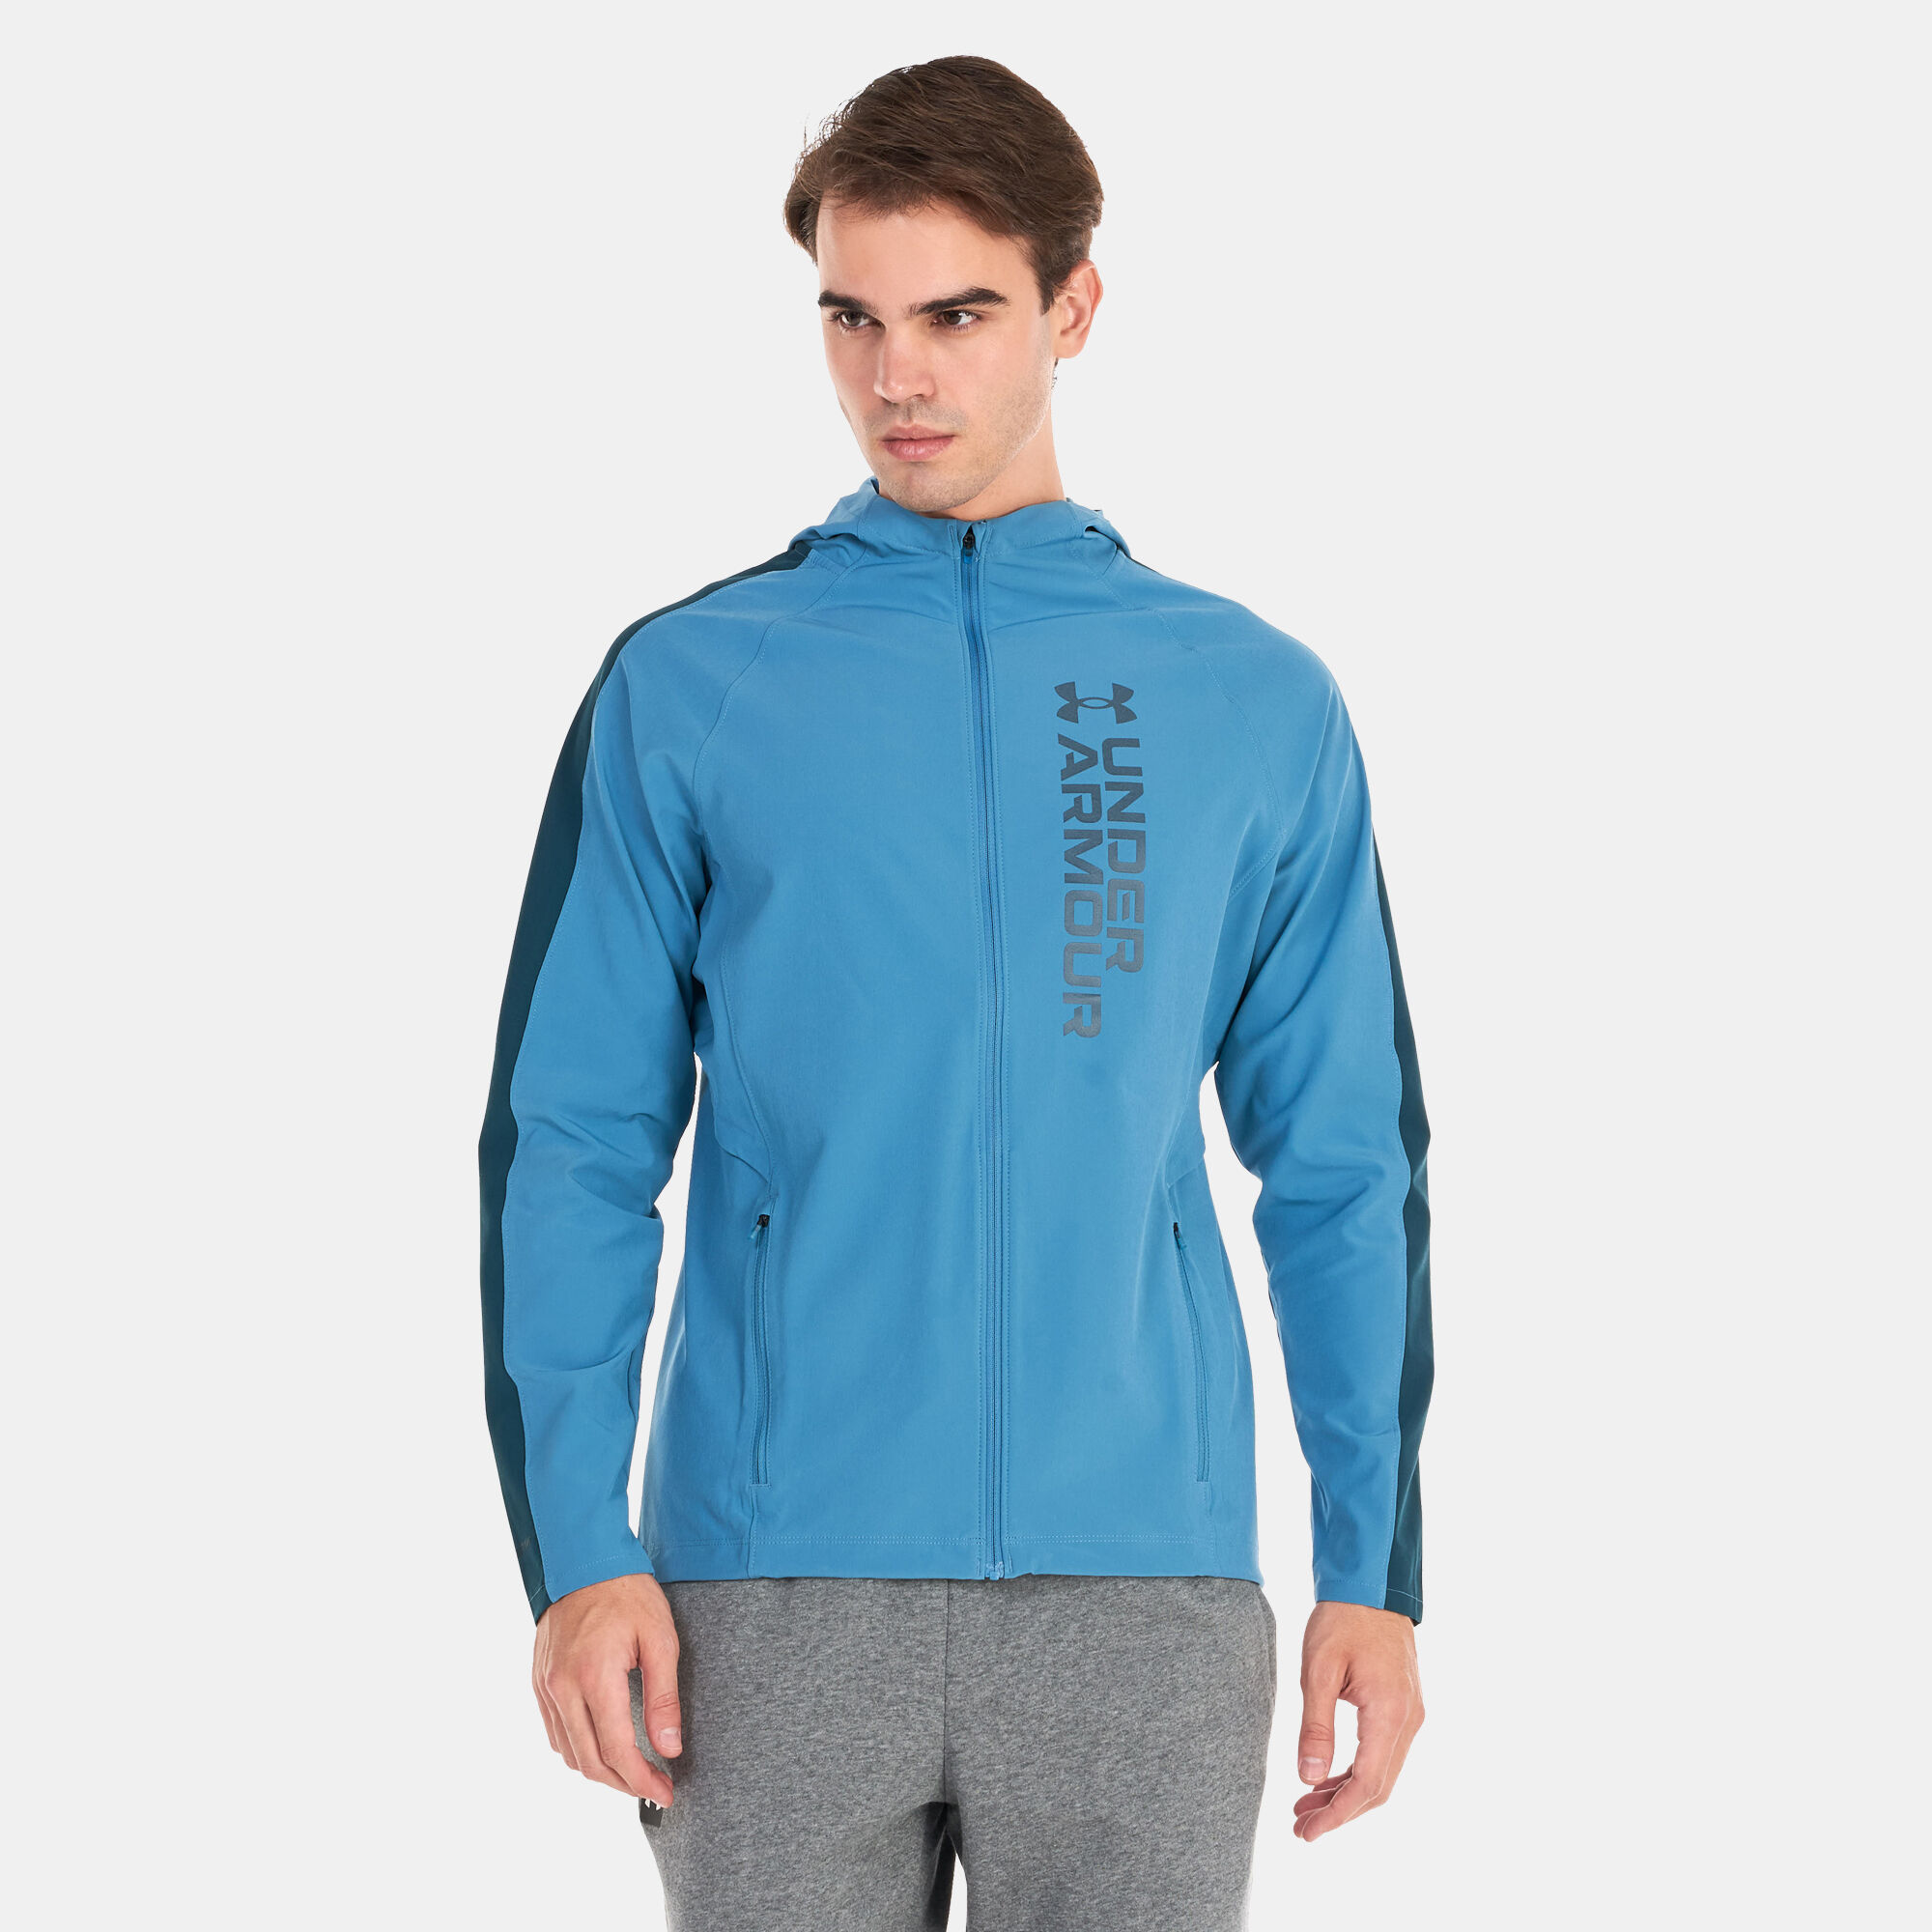 Under Armour Mens Outrun The Storm Jacket - Blue